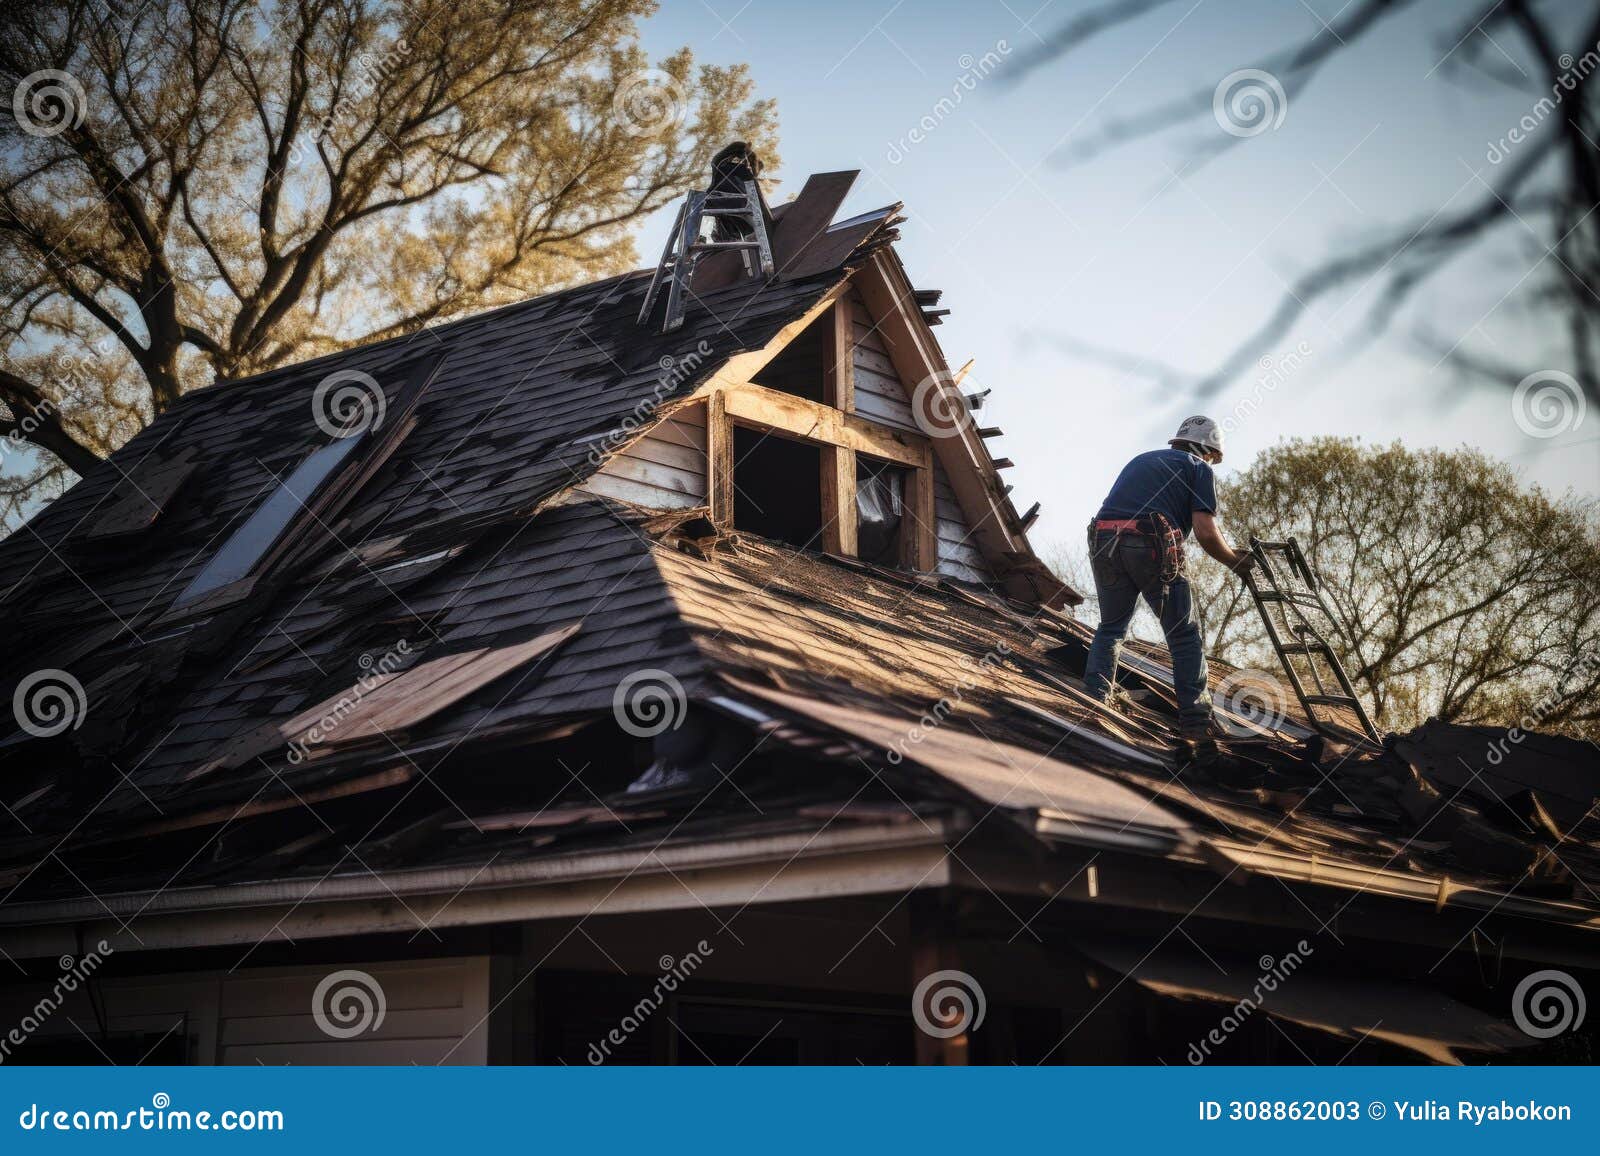 laborious old roof removing. generate ai